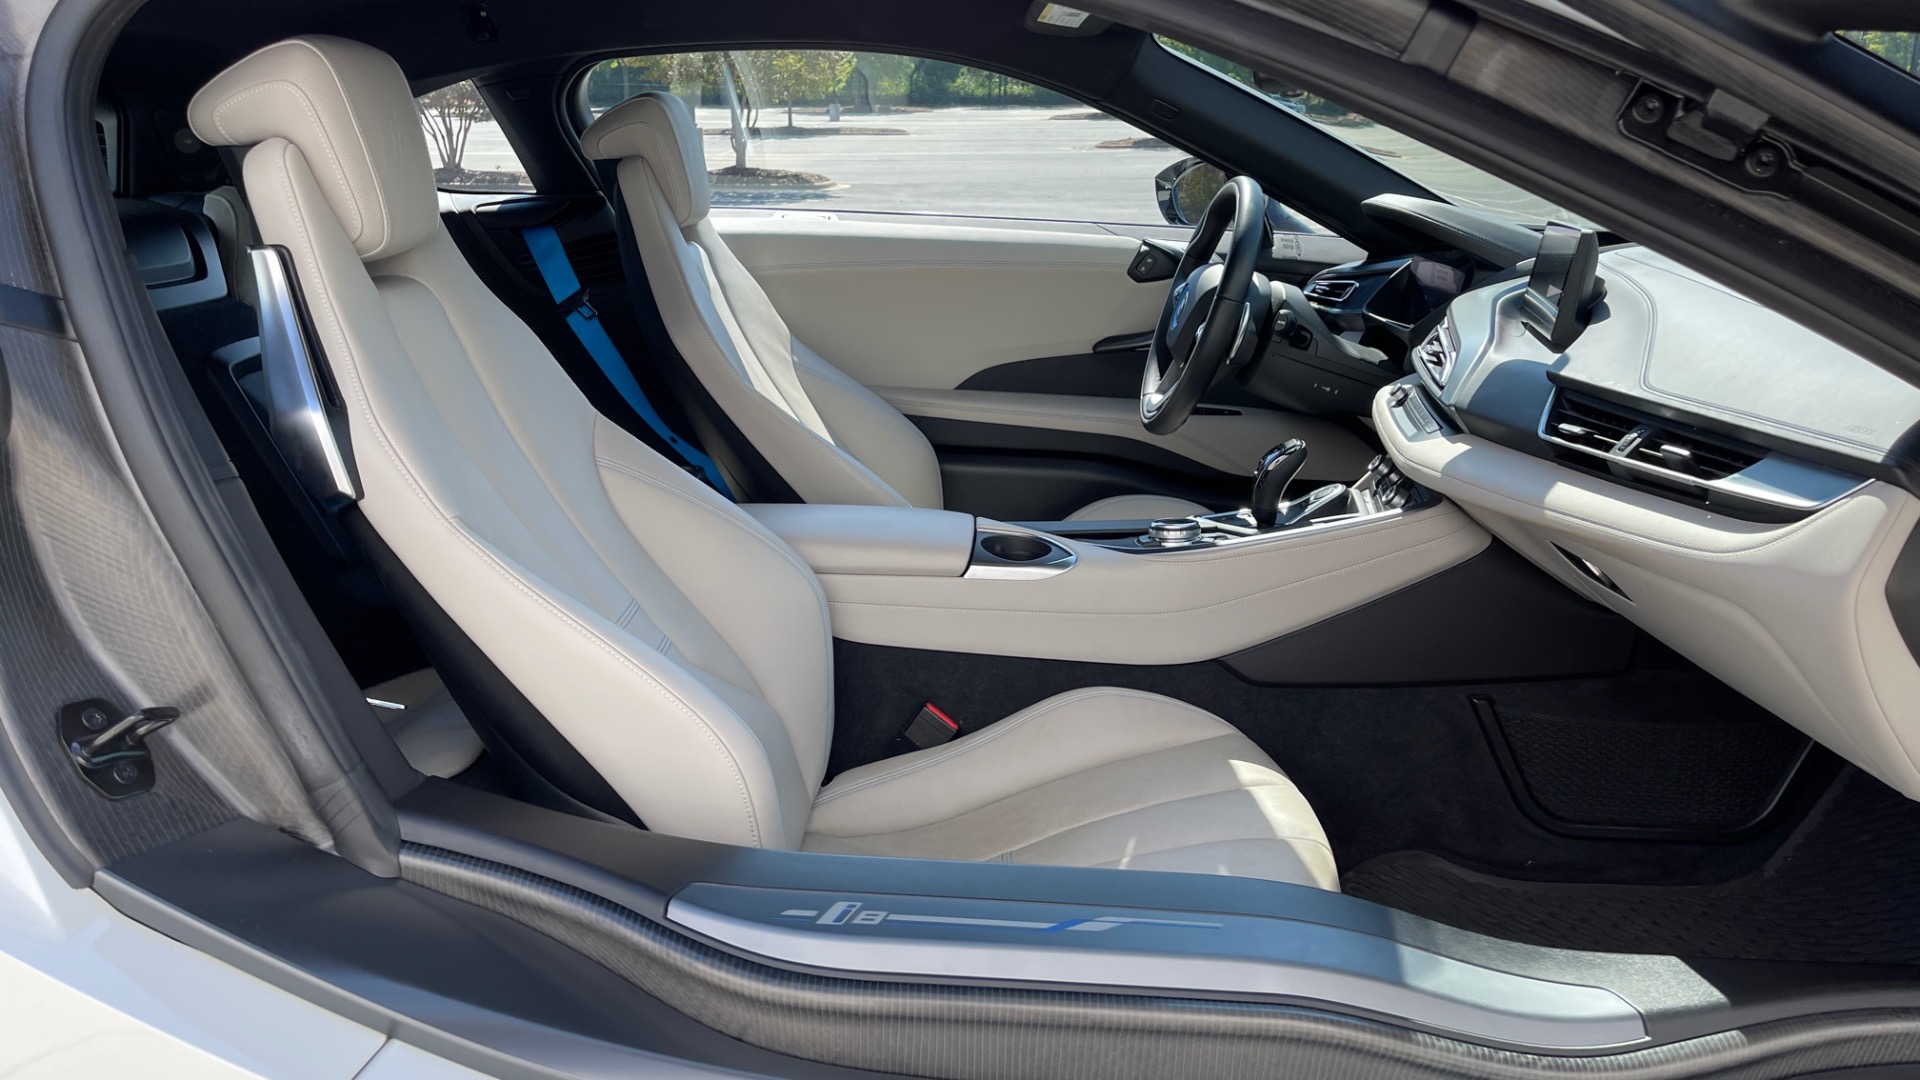 Used 2014 BMW i8 PURE IMPULSE WORLD / BLUE SEATBELTS / PERFORATED LEATHER / LED HEADLIGHTS for sale $75,999 at Formula Imports in Charlotte NC 28227 19